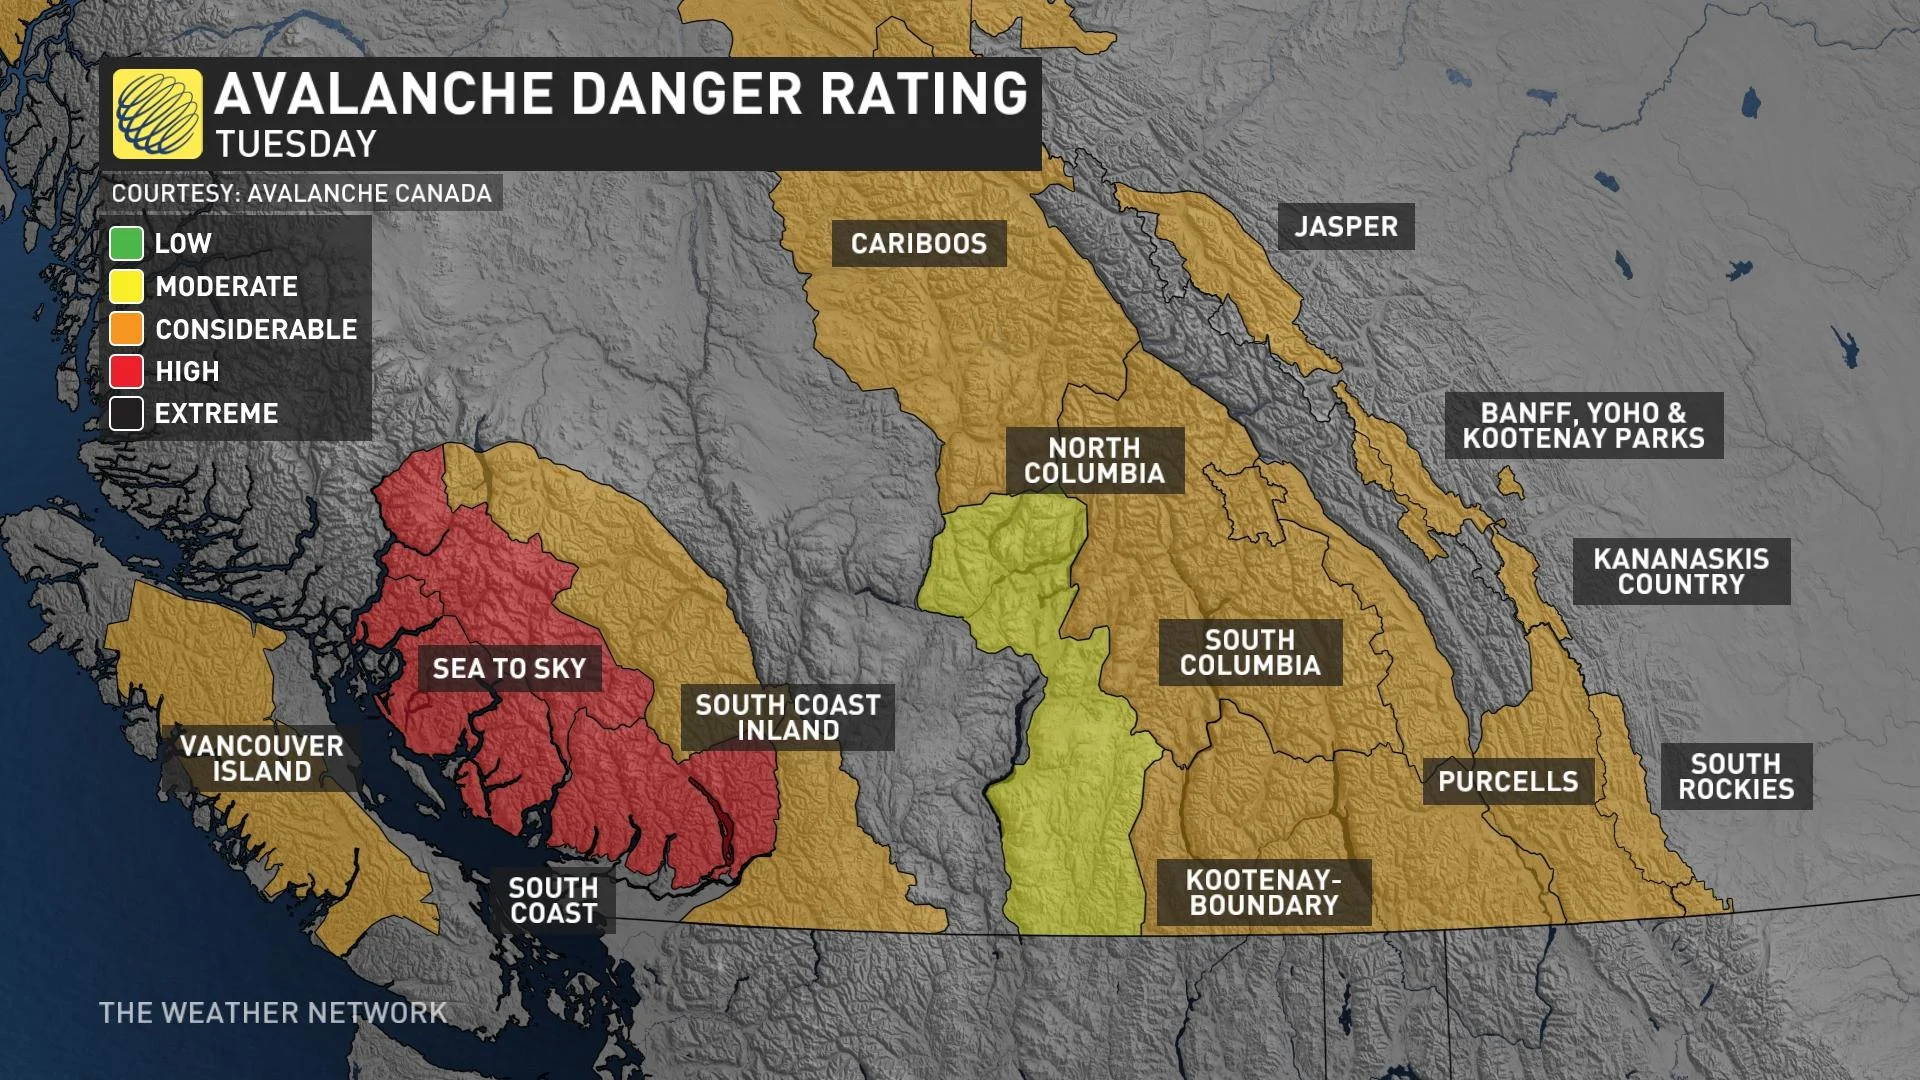 B.C. avalanche danger for Tuesday, March 12